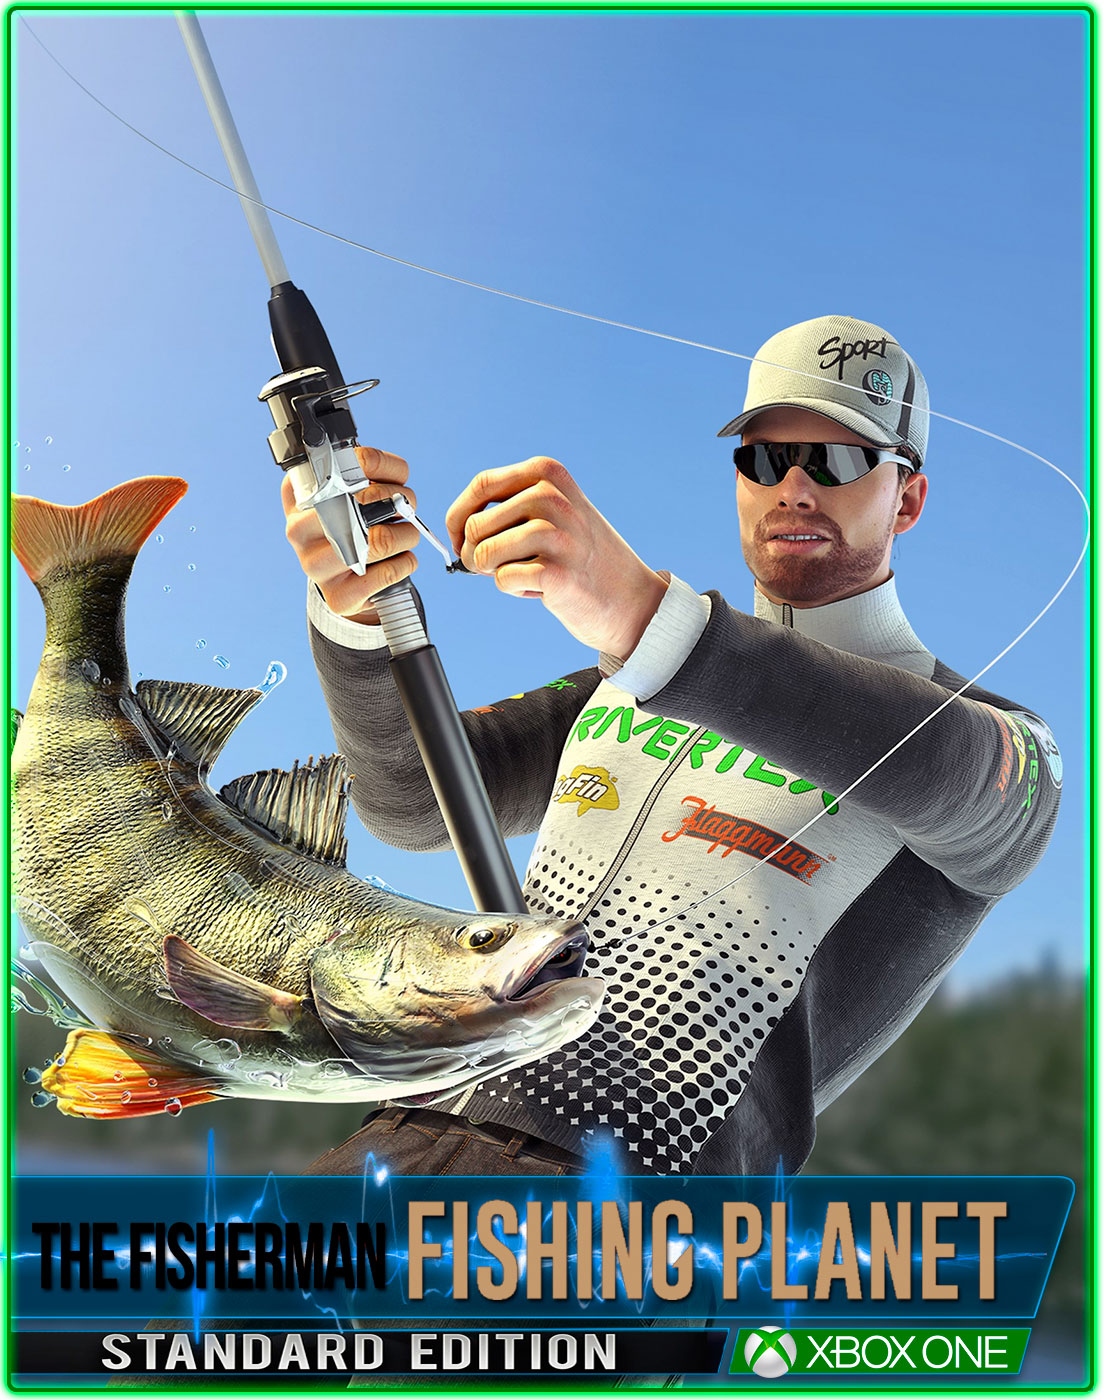 is fishing planet coming to xbox one